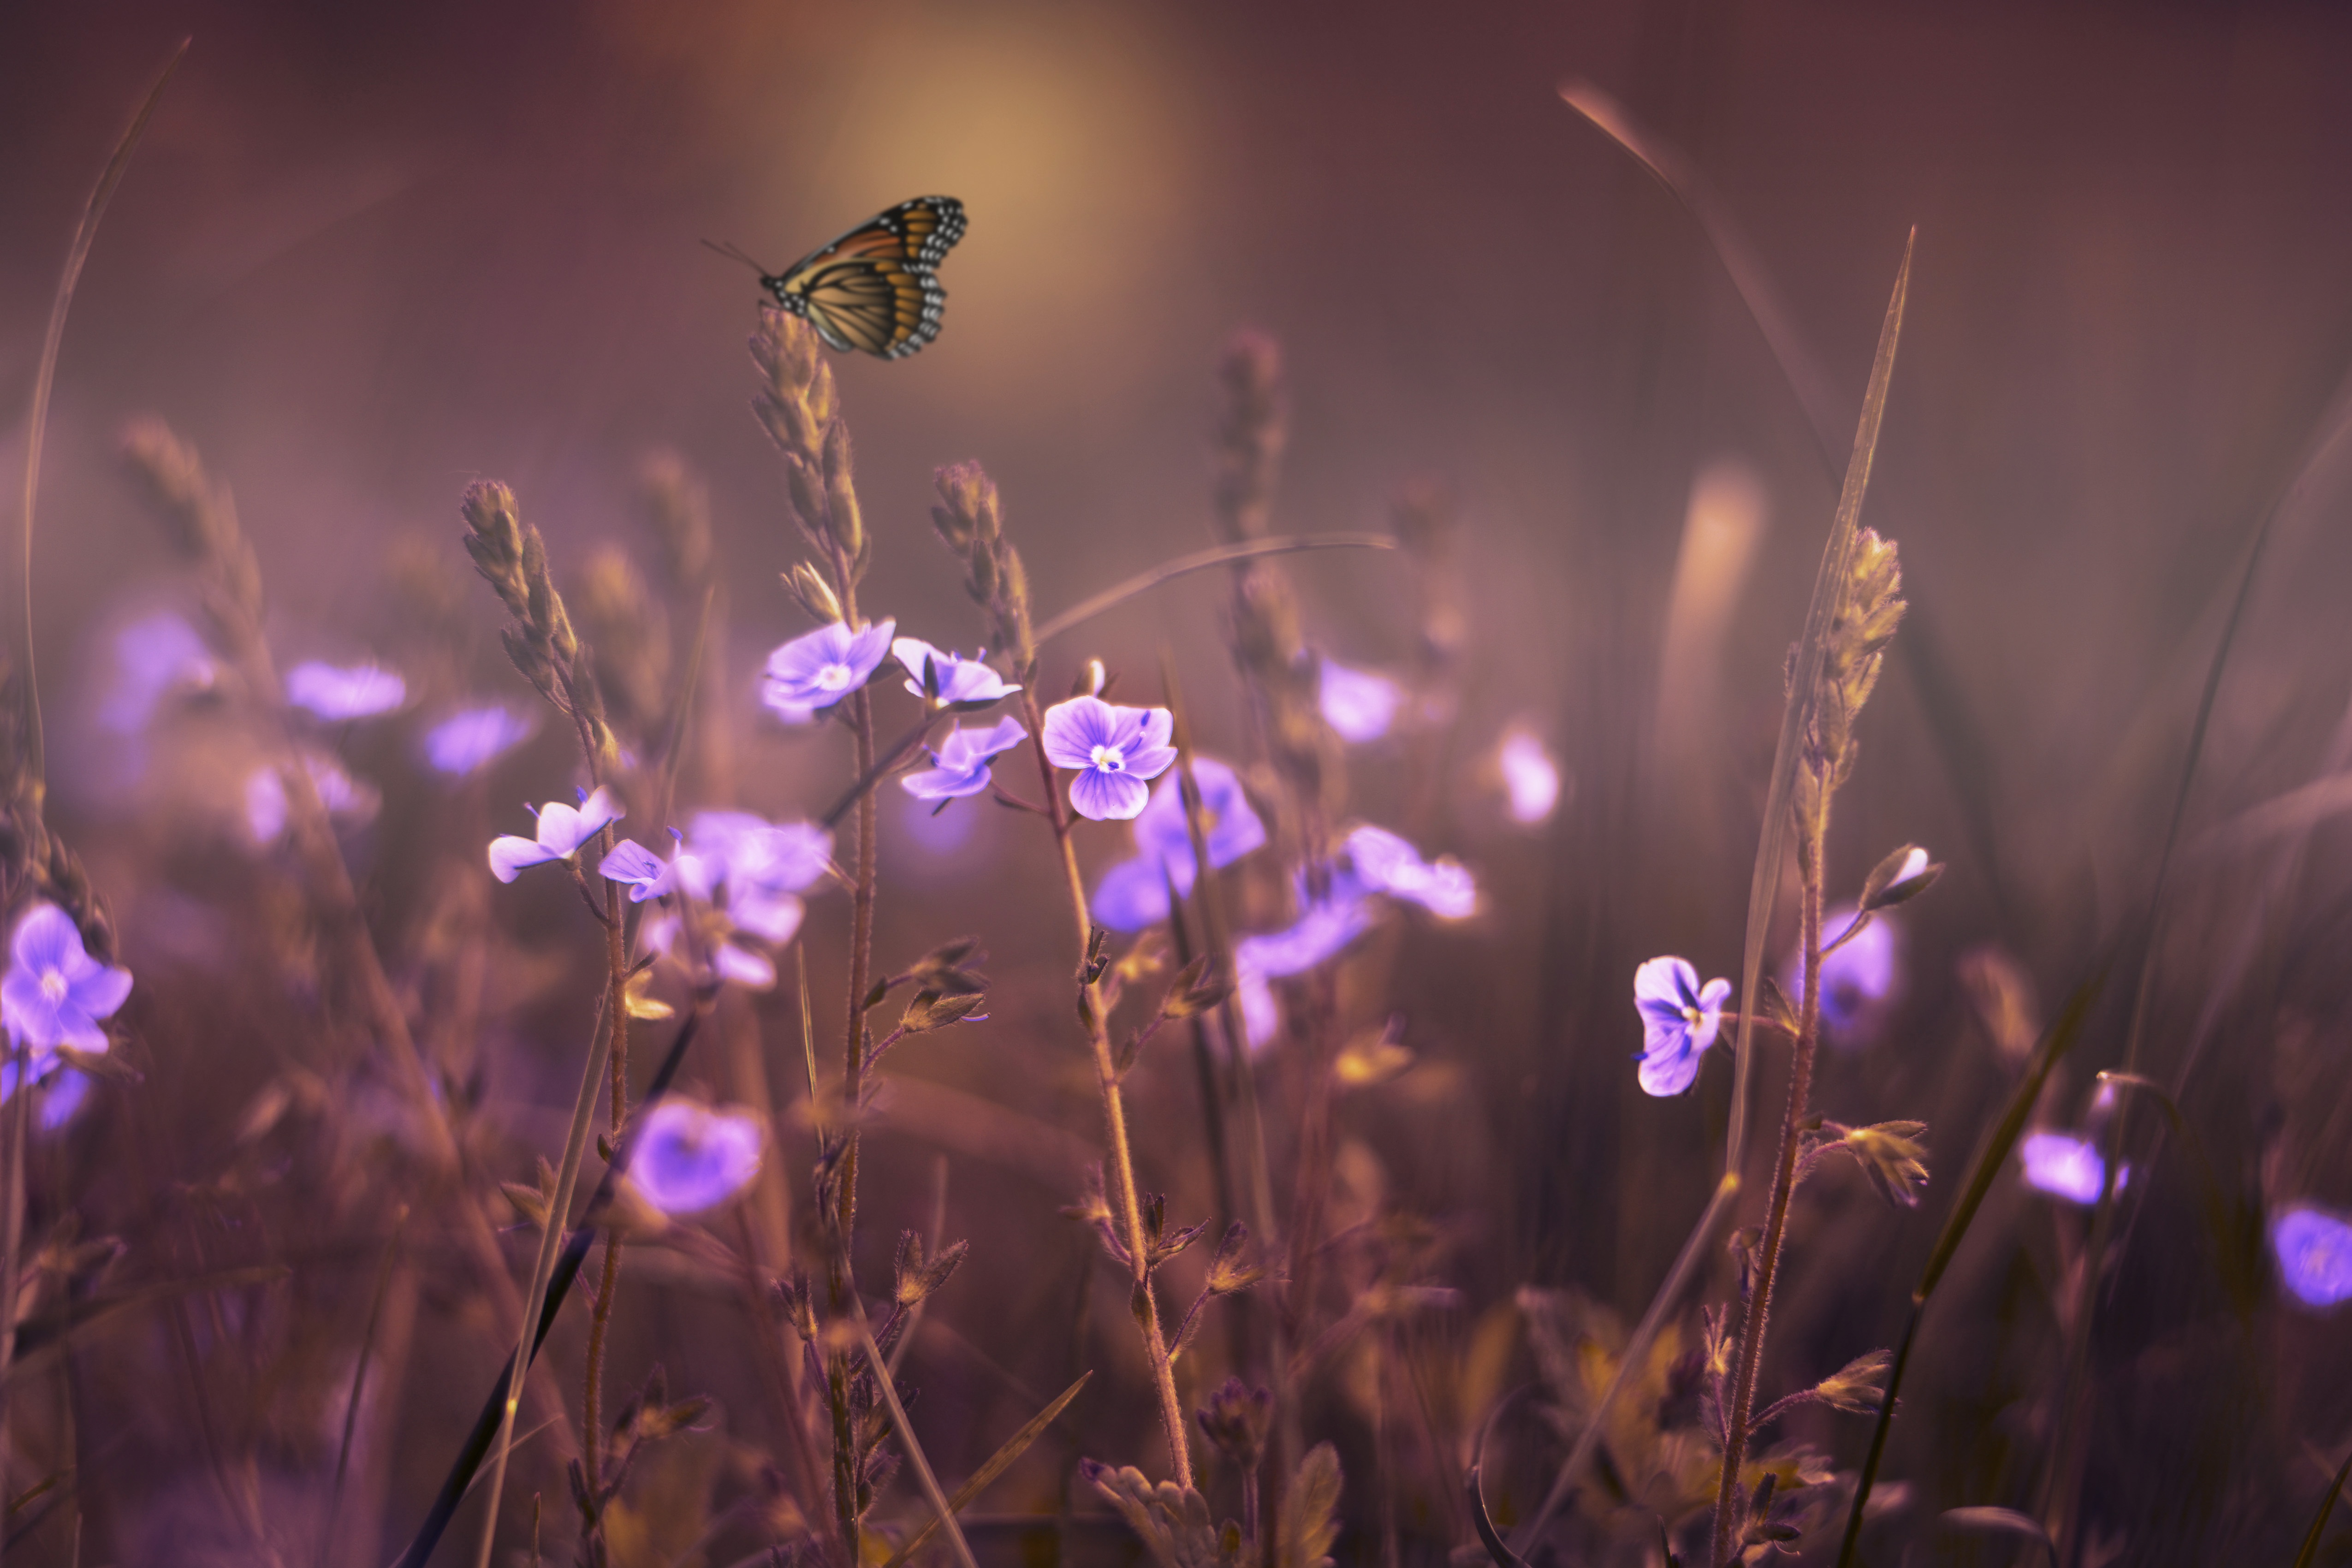 Free photo A lone butterfly sits on the grass among the purple flowers